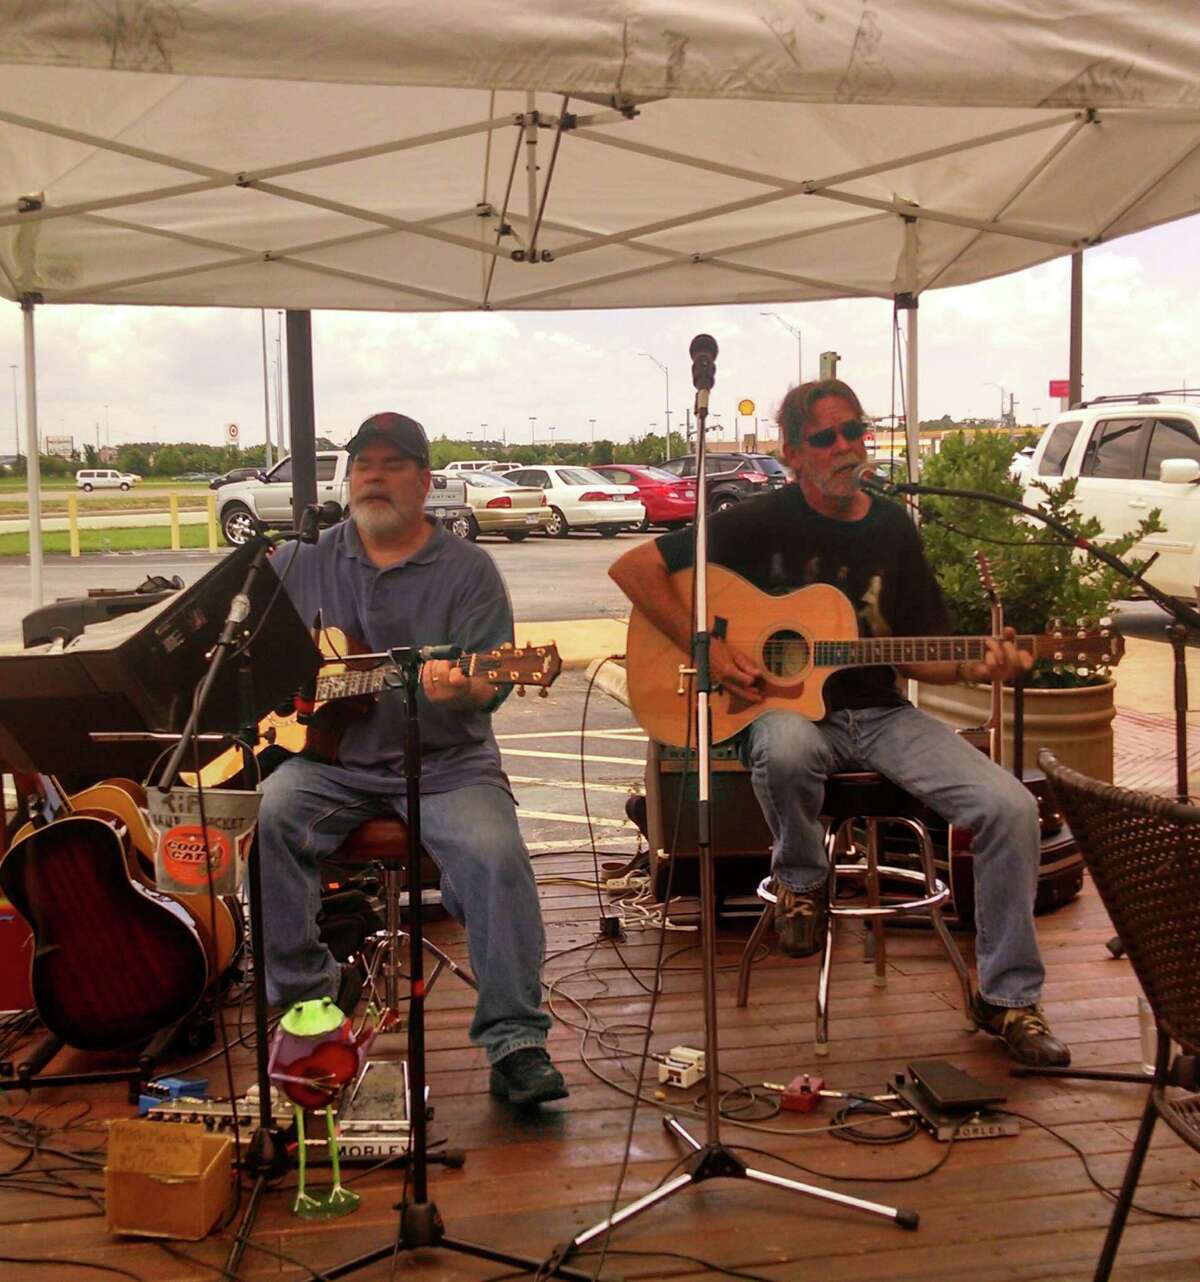 The free Spring Concert Series continues at LaCenterra at Cinco Ranch with the Marcoulier Brothers on April 18.